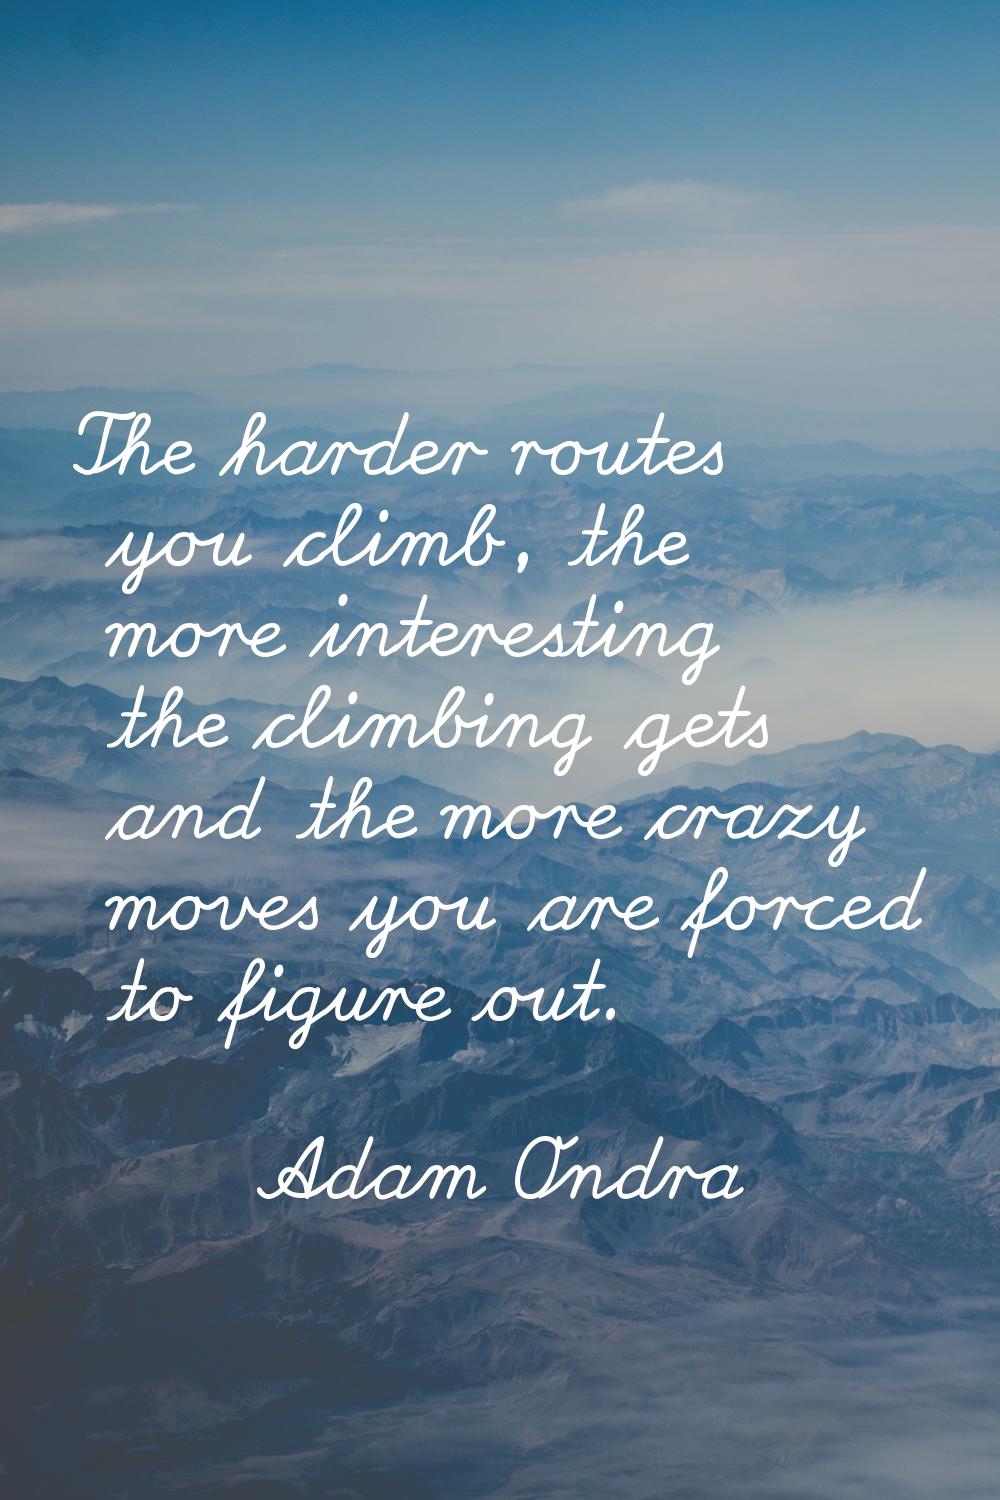 The harder routes you climb, the more interesting the climbing gets and the more crazy moves you ar